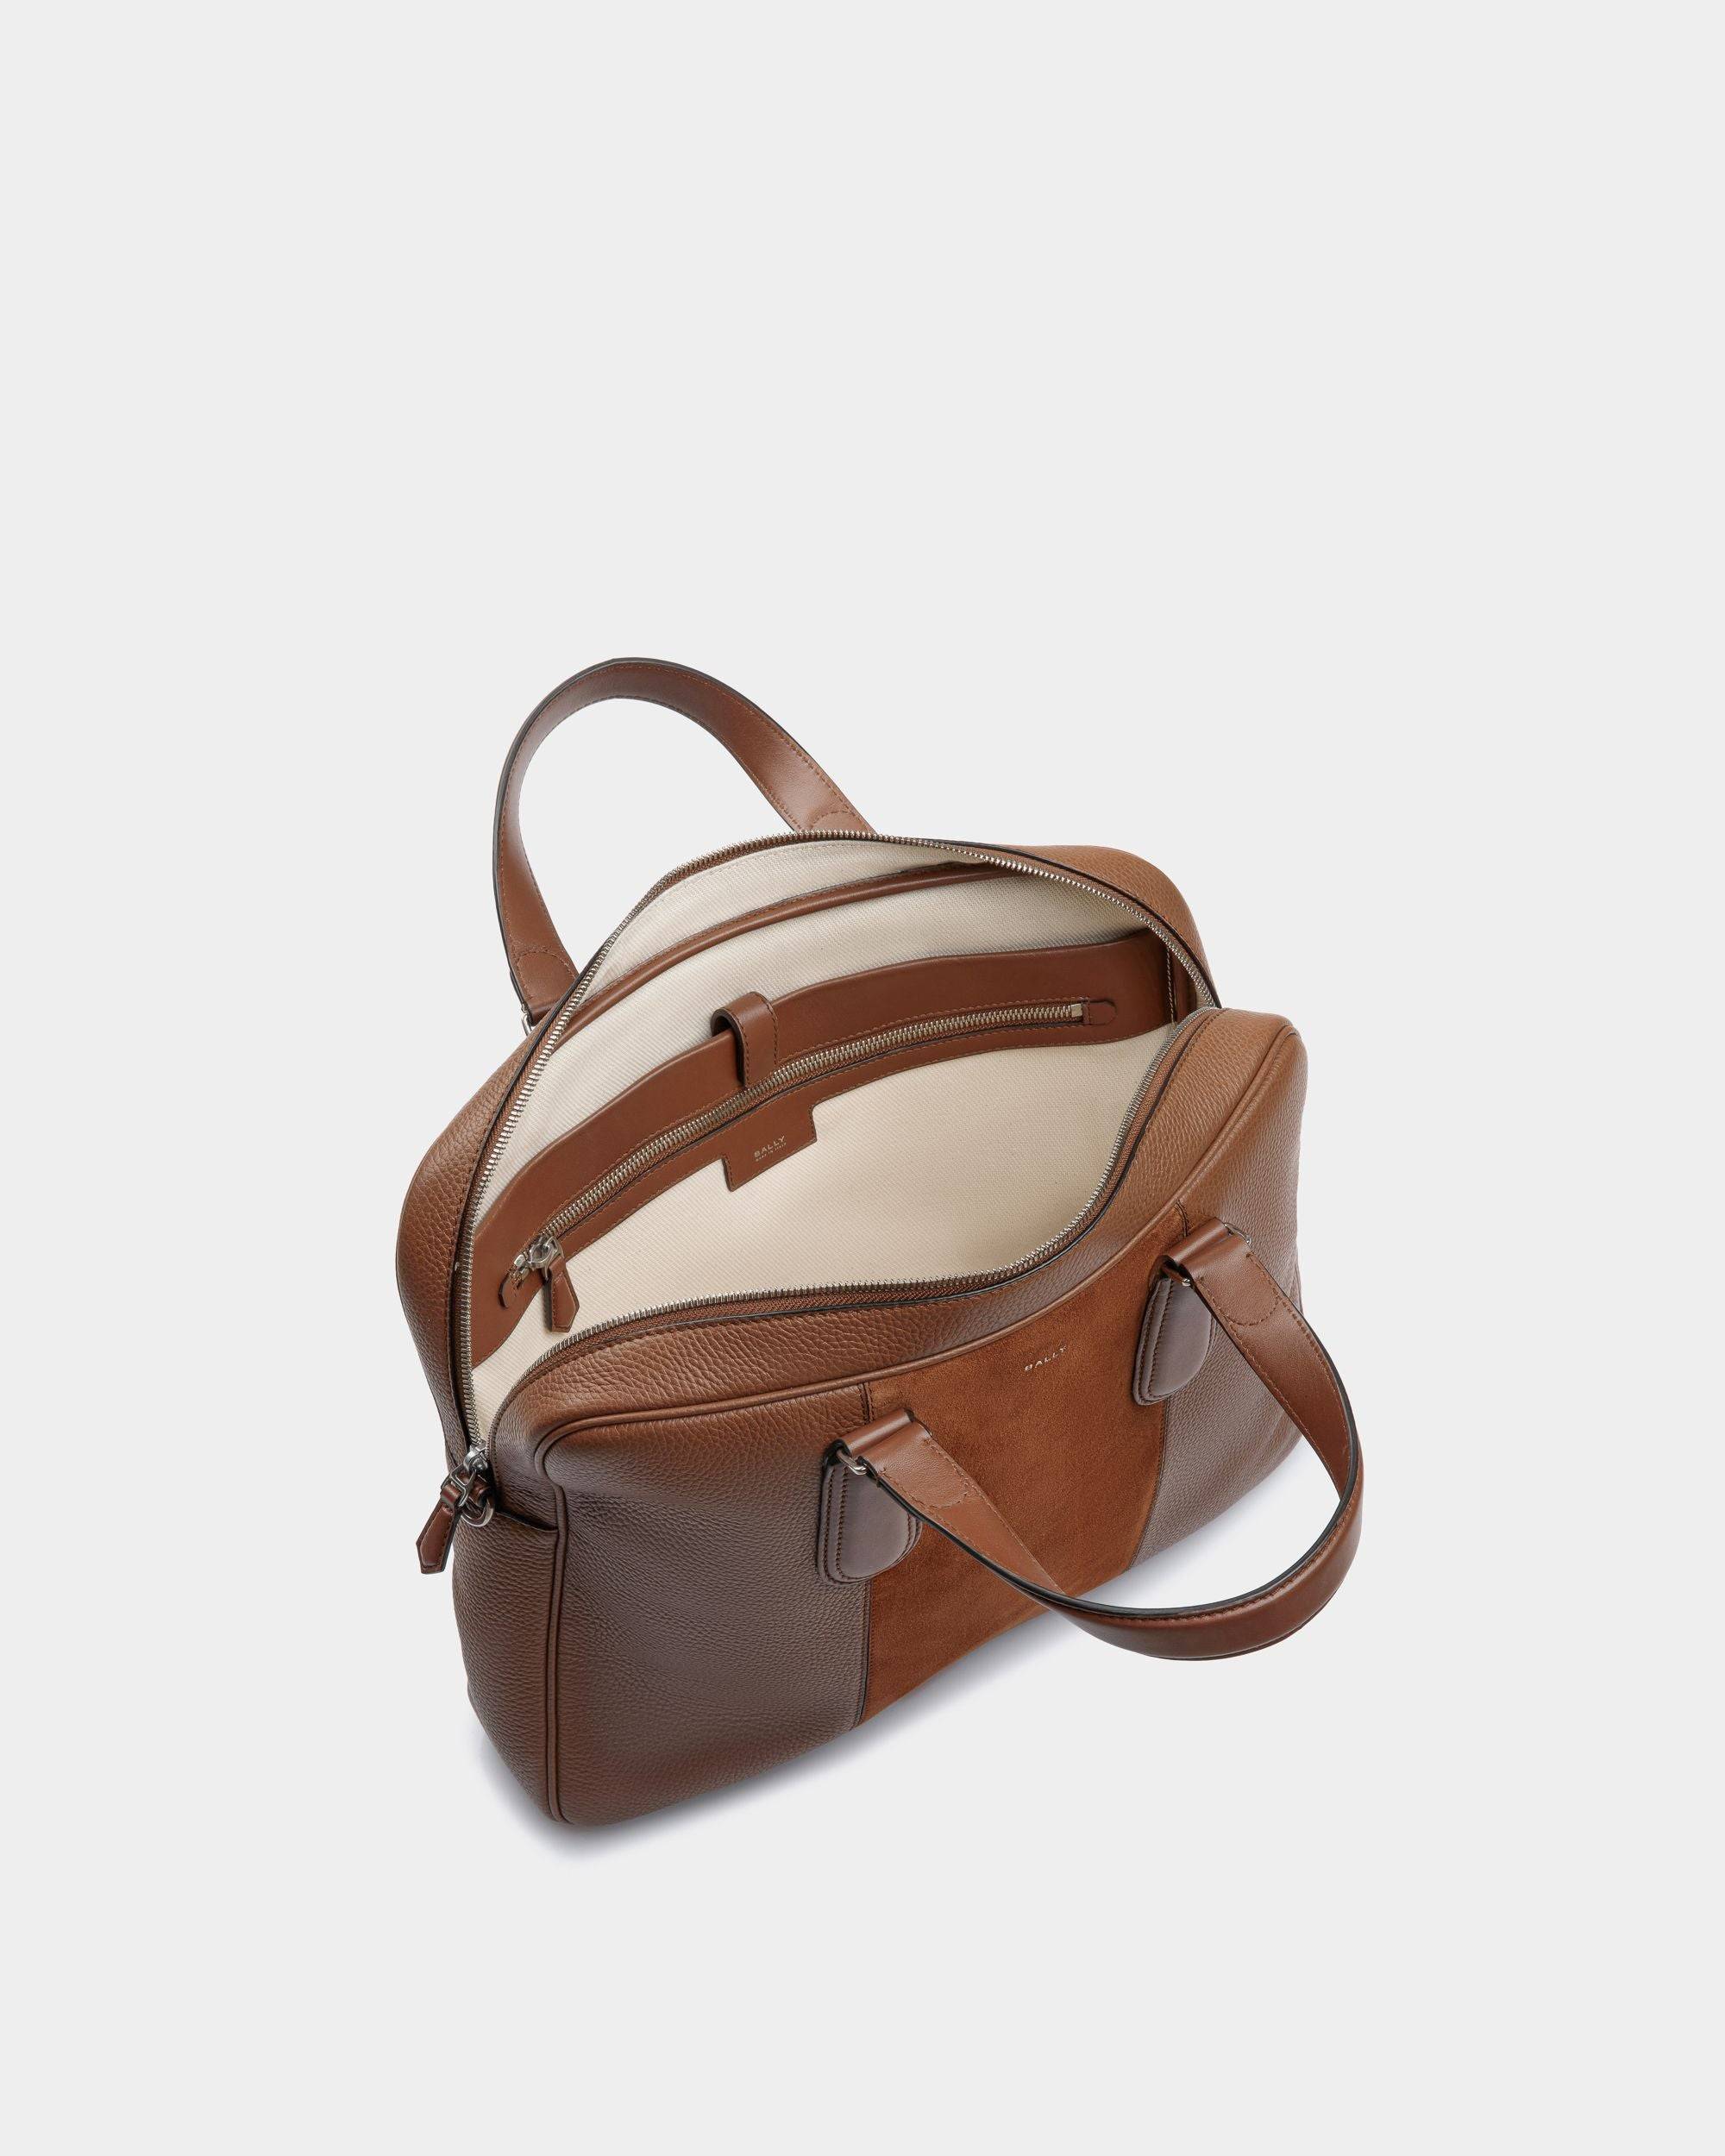 Spin | Men's Briefcase in Brown Leather | Bally | Still Life Open / Inside